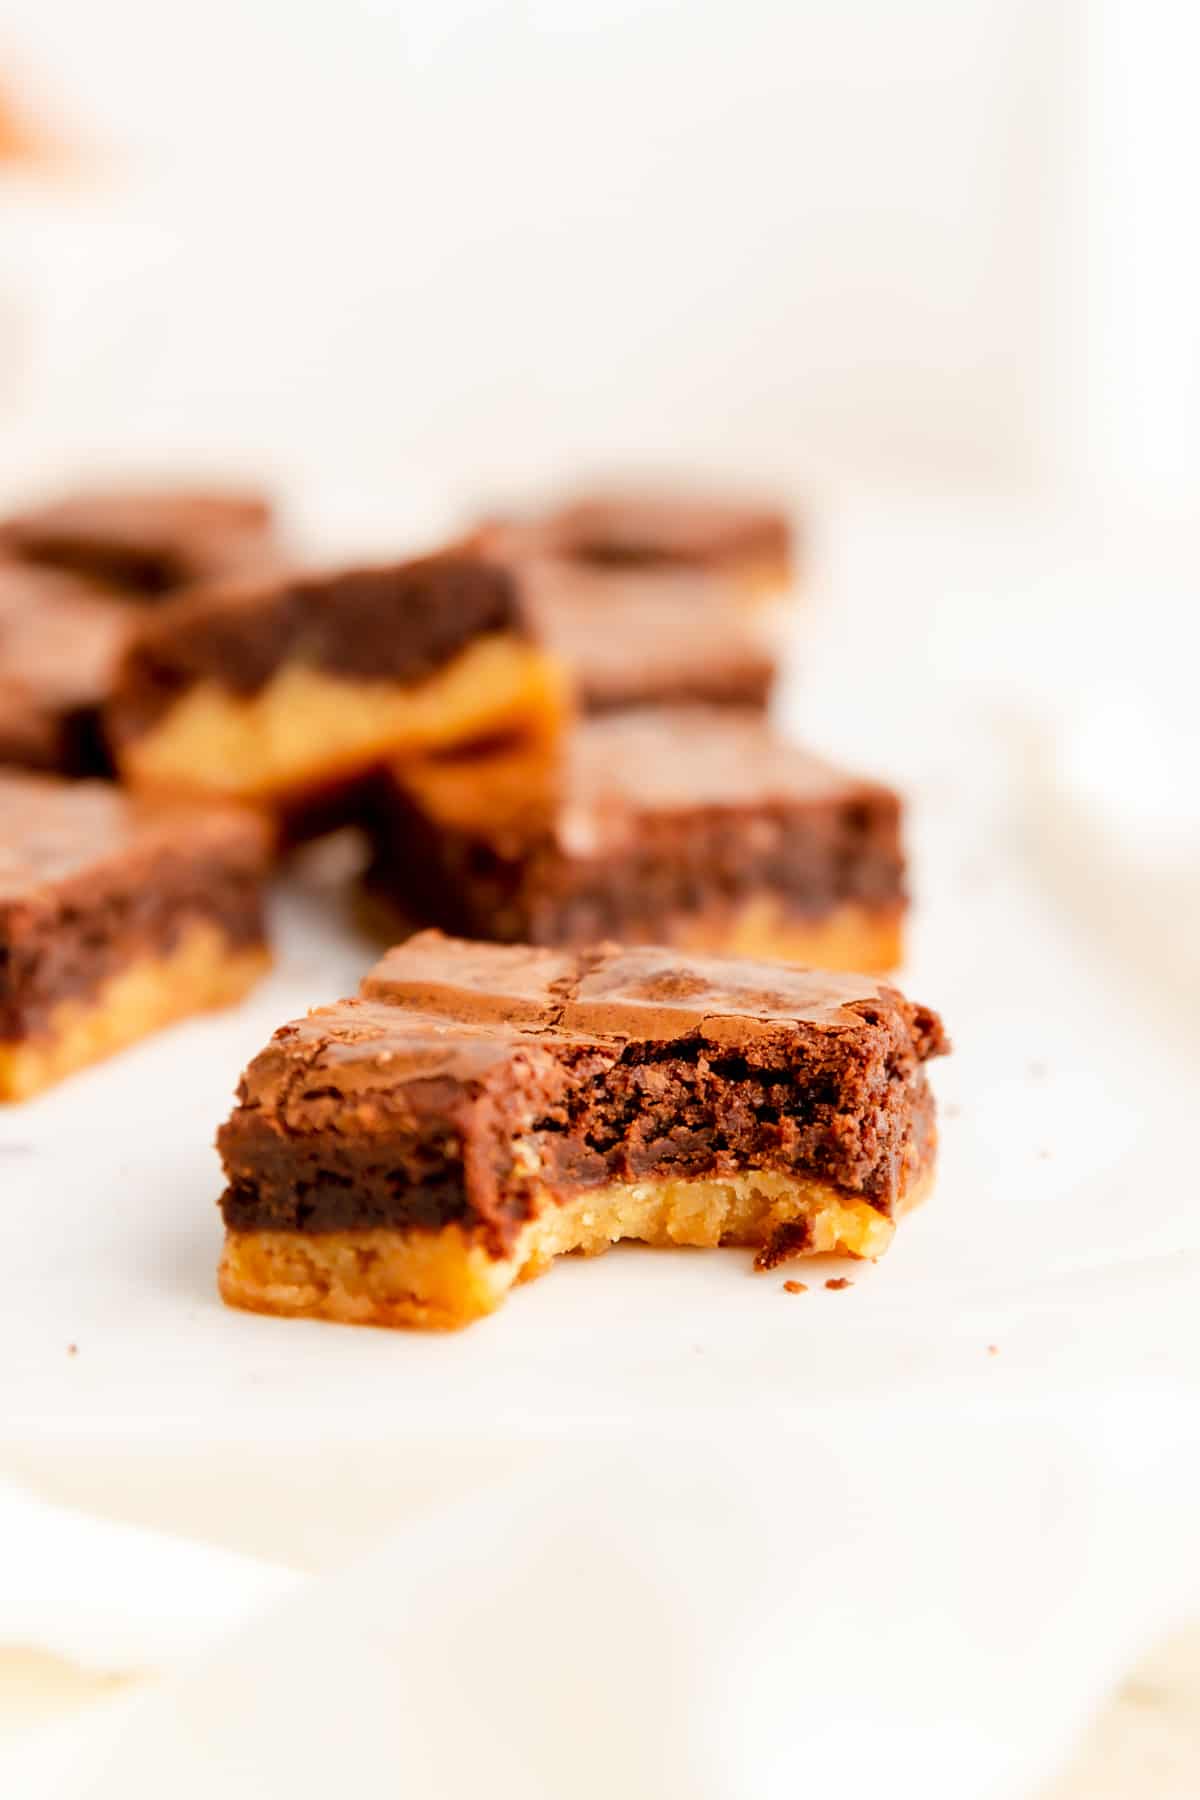 A close-up of a brownie blondie with a bite out and other bars in background.